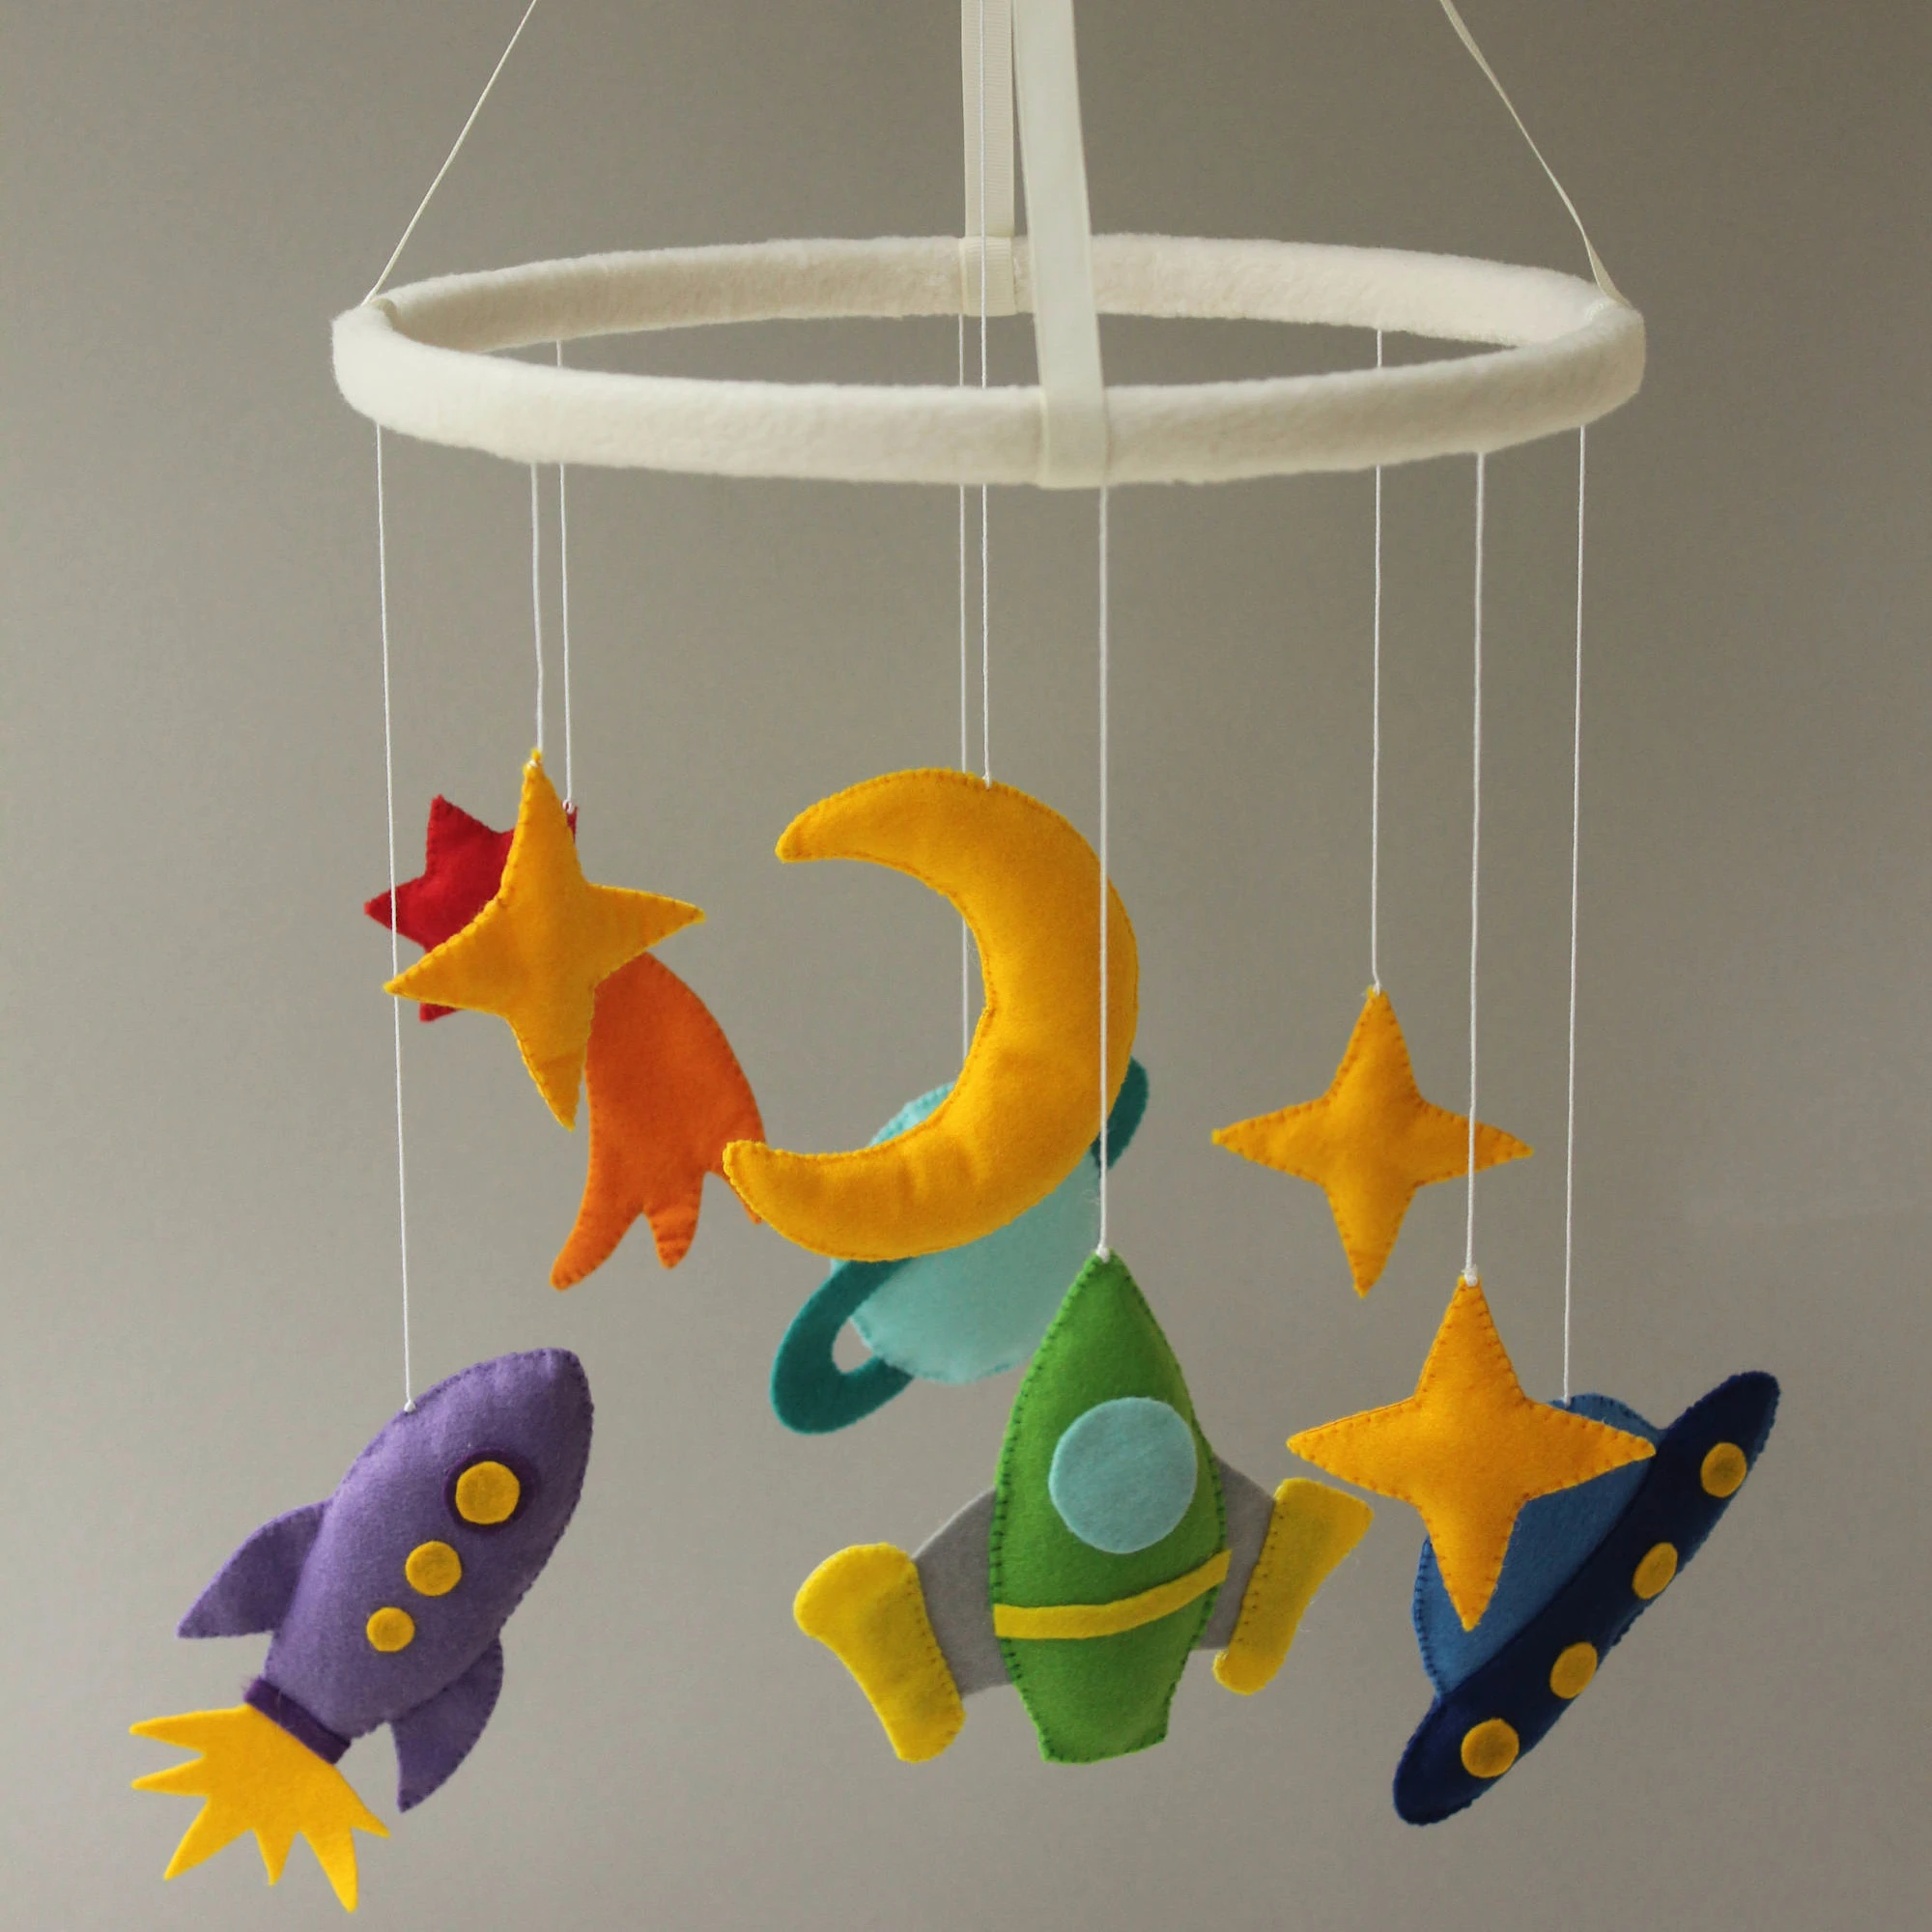 Rocket Mobile Planet Mobile Moon Mobile Space Mobile Hanging Mobile Nursery Mobile Mobile Baby Baby Mobile Felt Crib Mobile View Baby Crib Mobile Ry Product Details From Xingtai City Rui Yuan Import